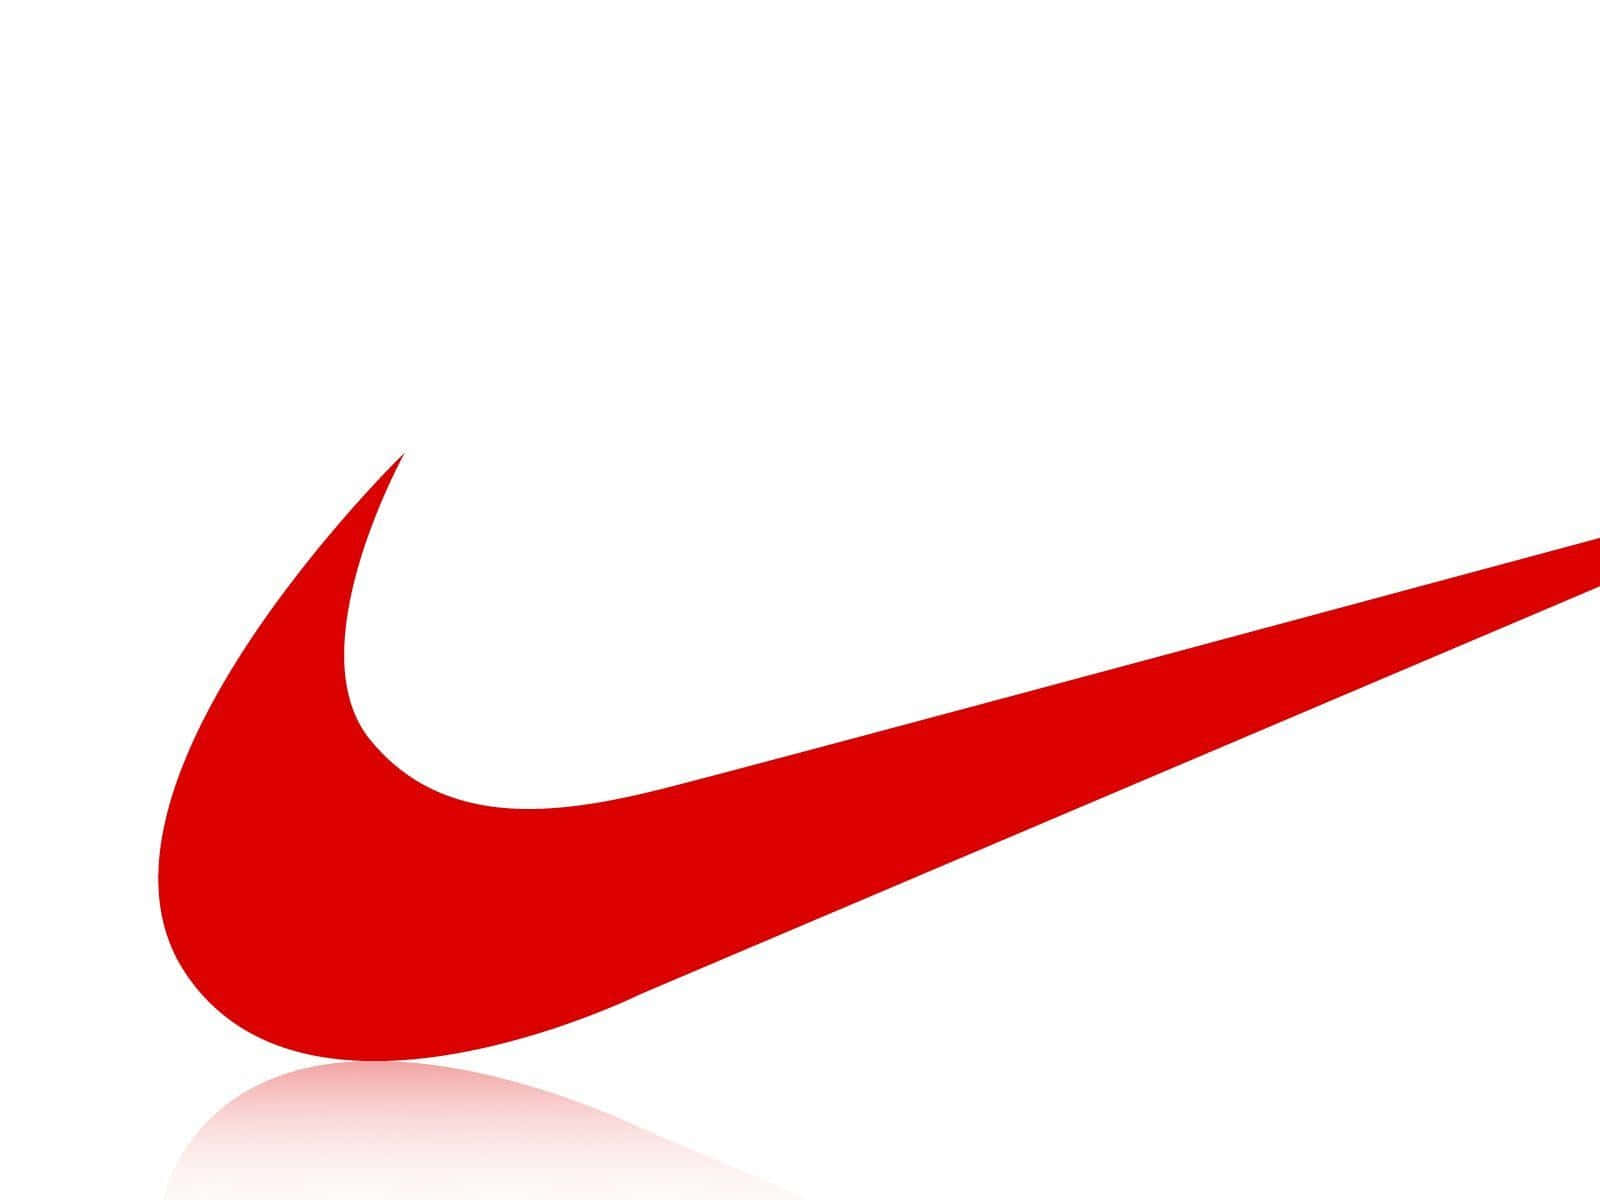 Catch the electrifying Red Nike!" Wallpaper